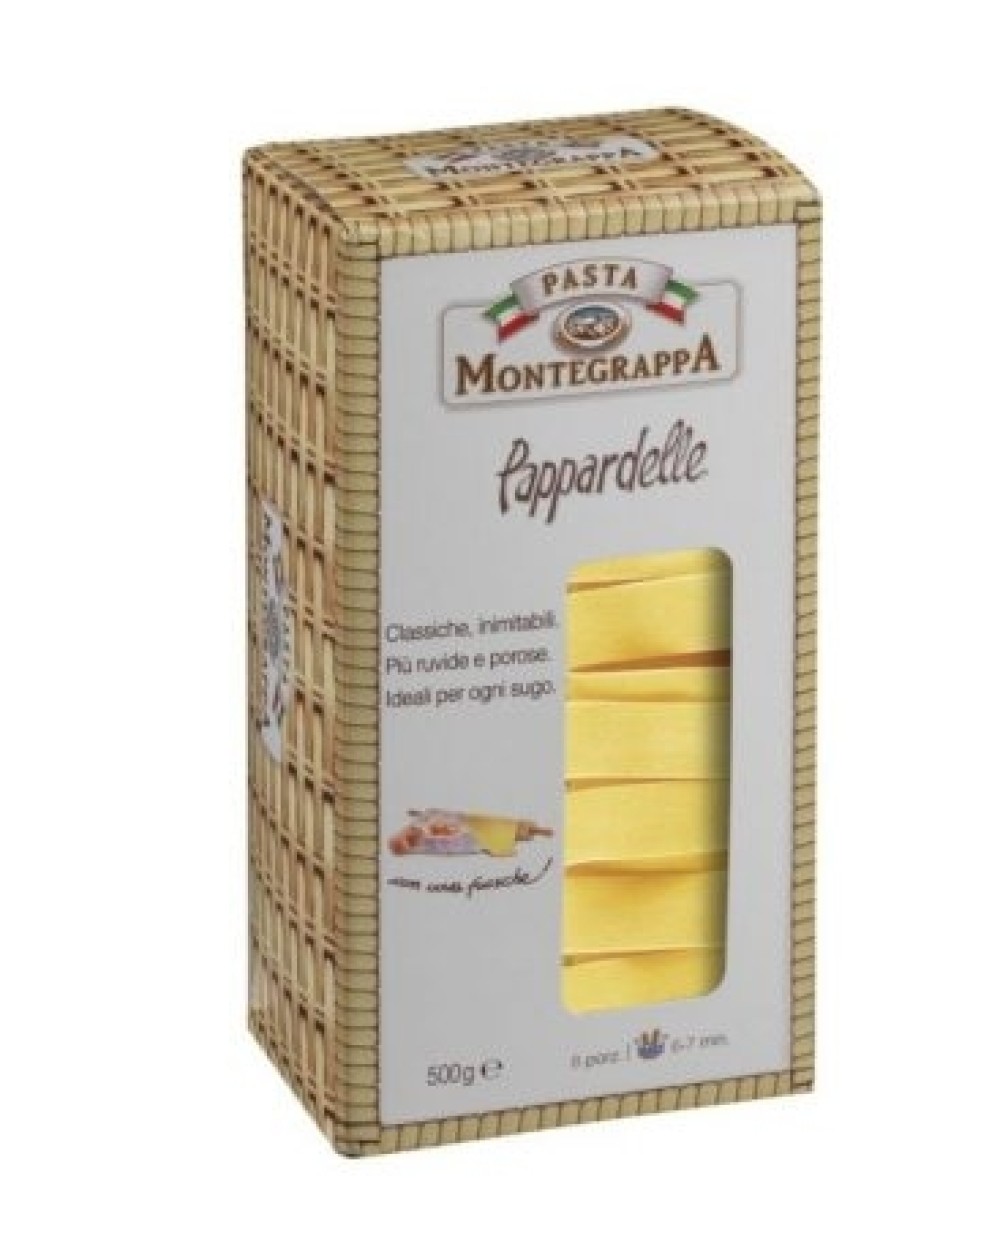 Montegrappa PAPPARDELLE 12x250g